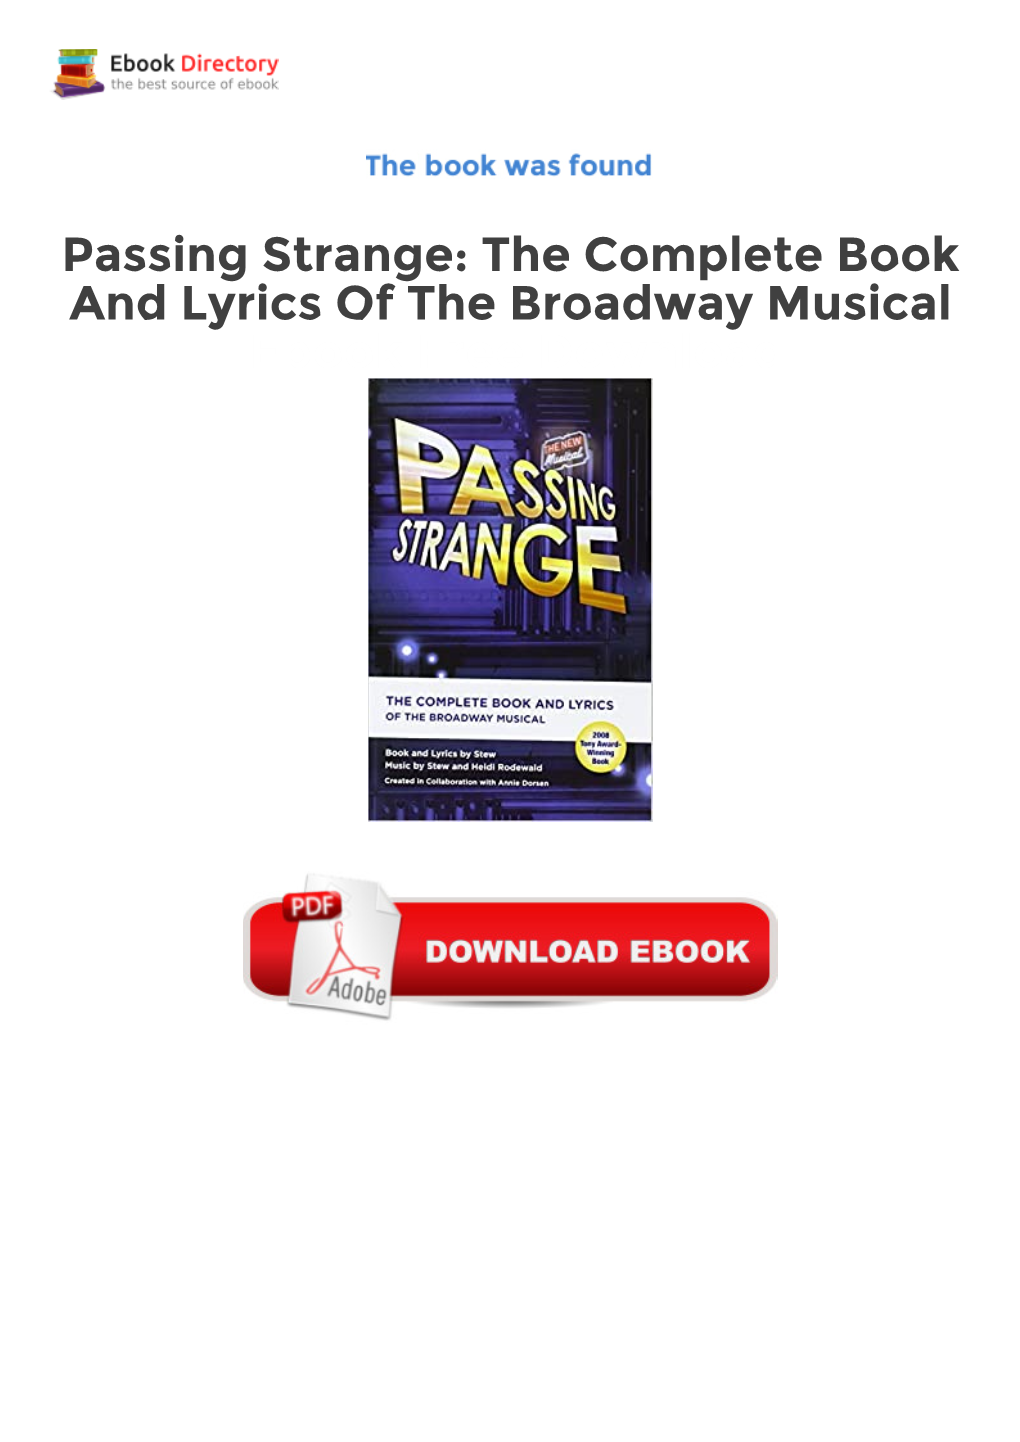 Passing Strange: the Complete Book and Lyrics of the Broadway Musical Ebook Free Download (Applause Libretto Library)